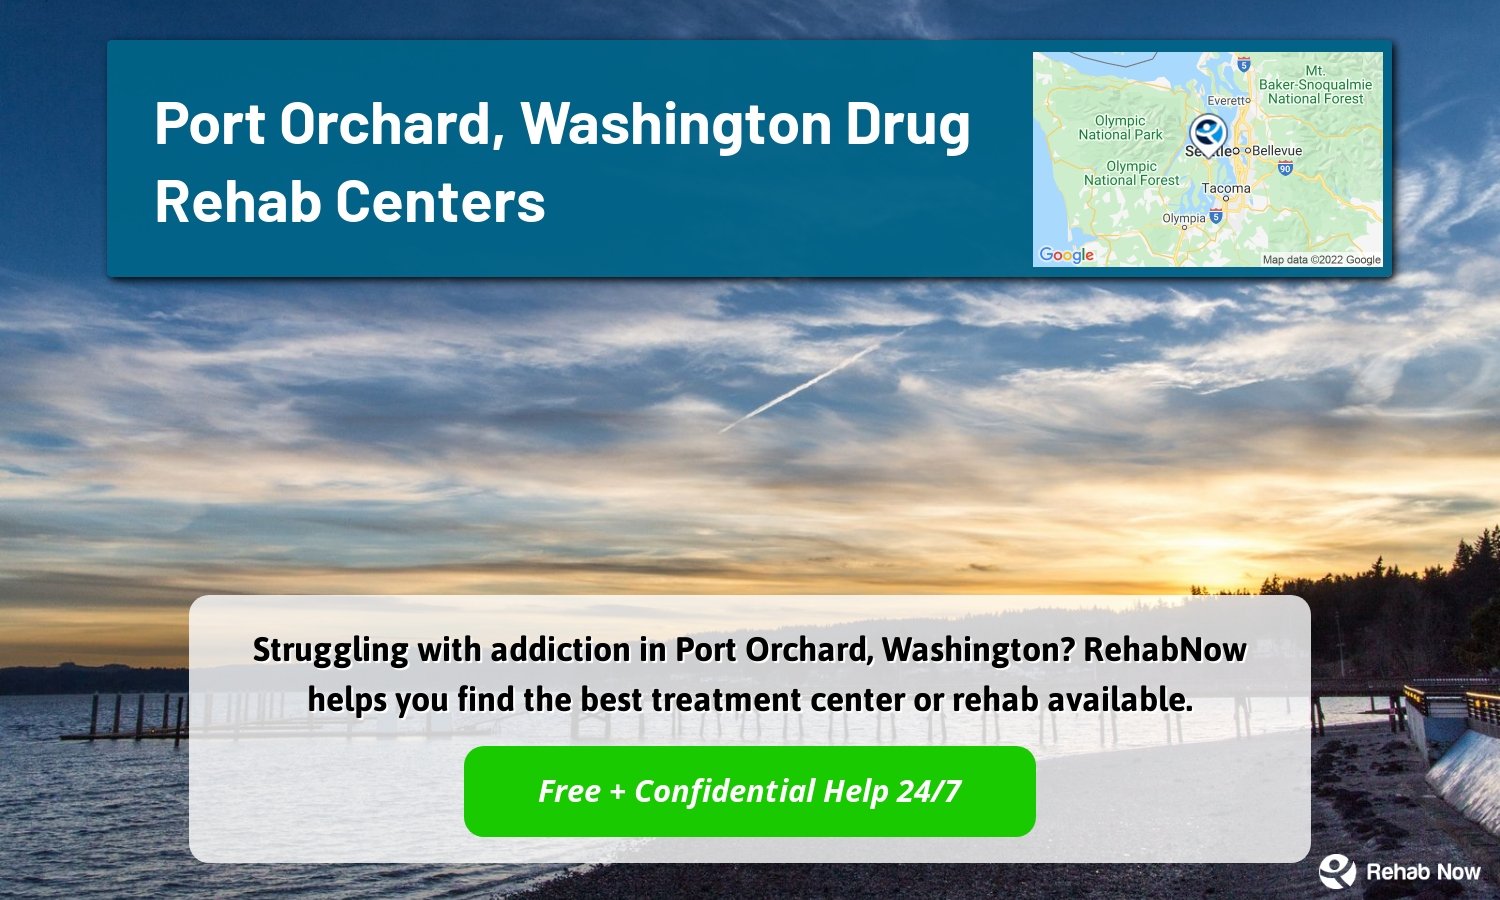 Struggling with addiction in Port Orchard, Washington? RehabNow helps you find the best treatment center or rehab available.